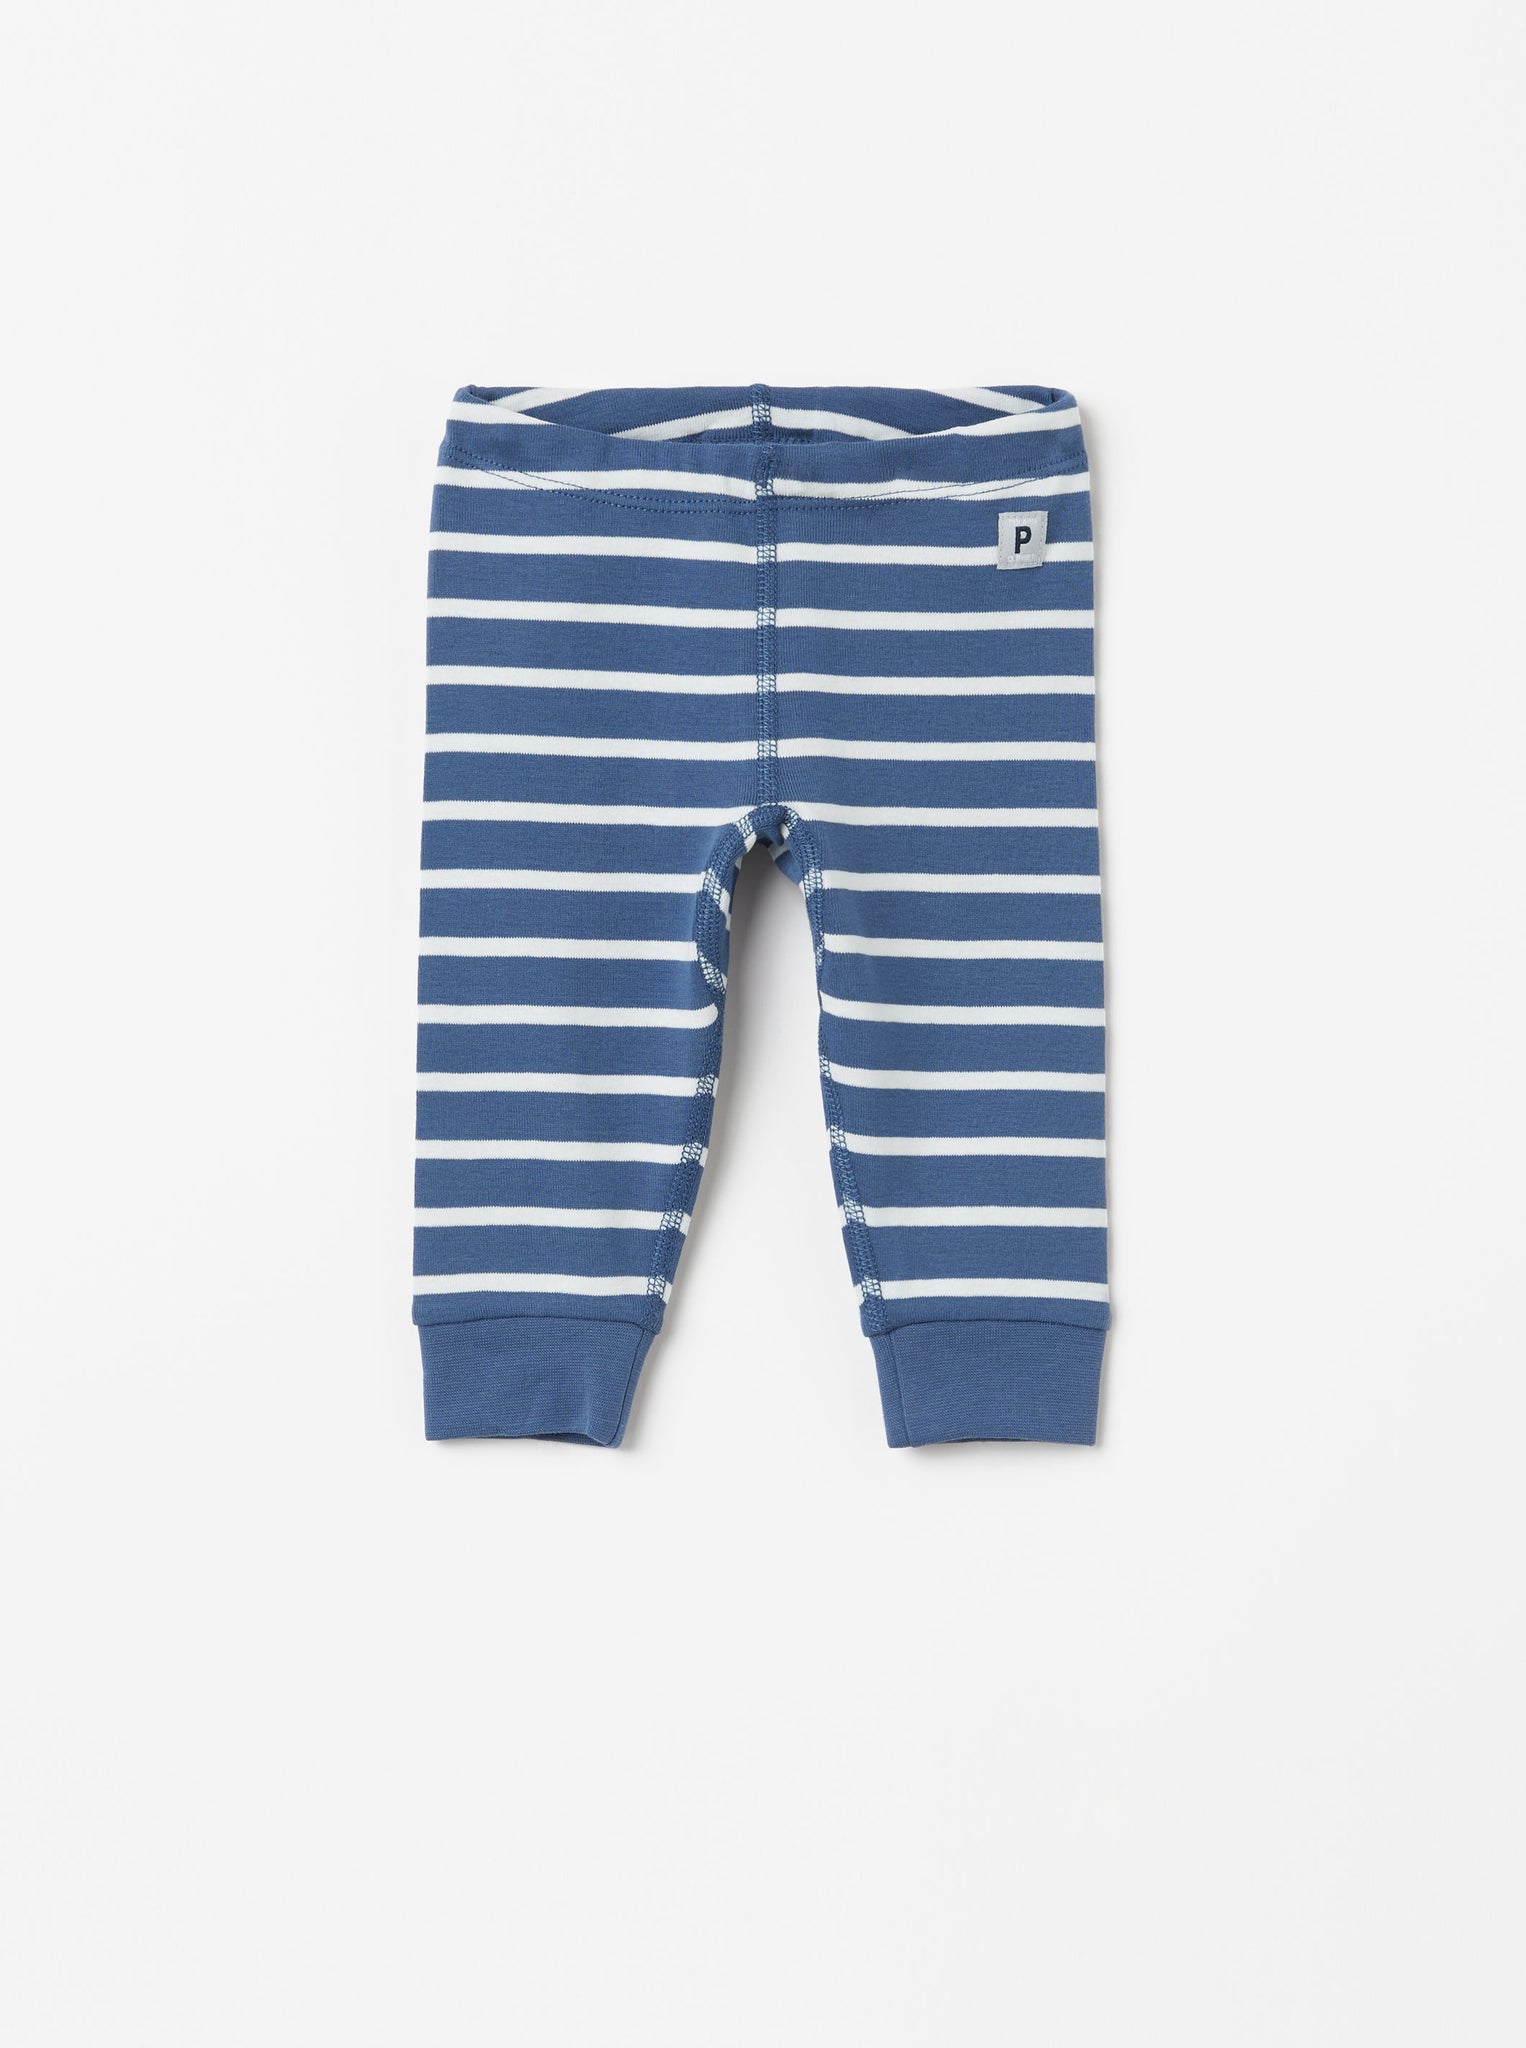 Organic Cotton Blue Baby Leggings from the Polarn O. Pyret Kidswear collection. Ethically produced kids clothing.